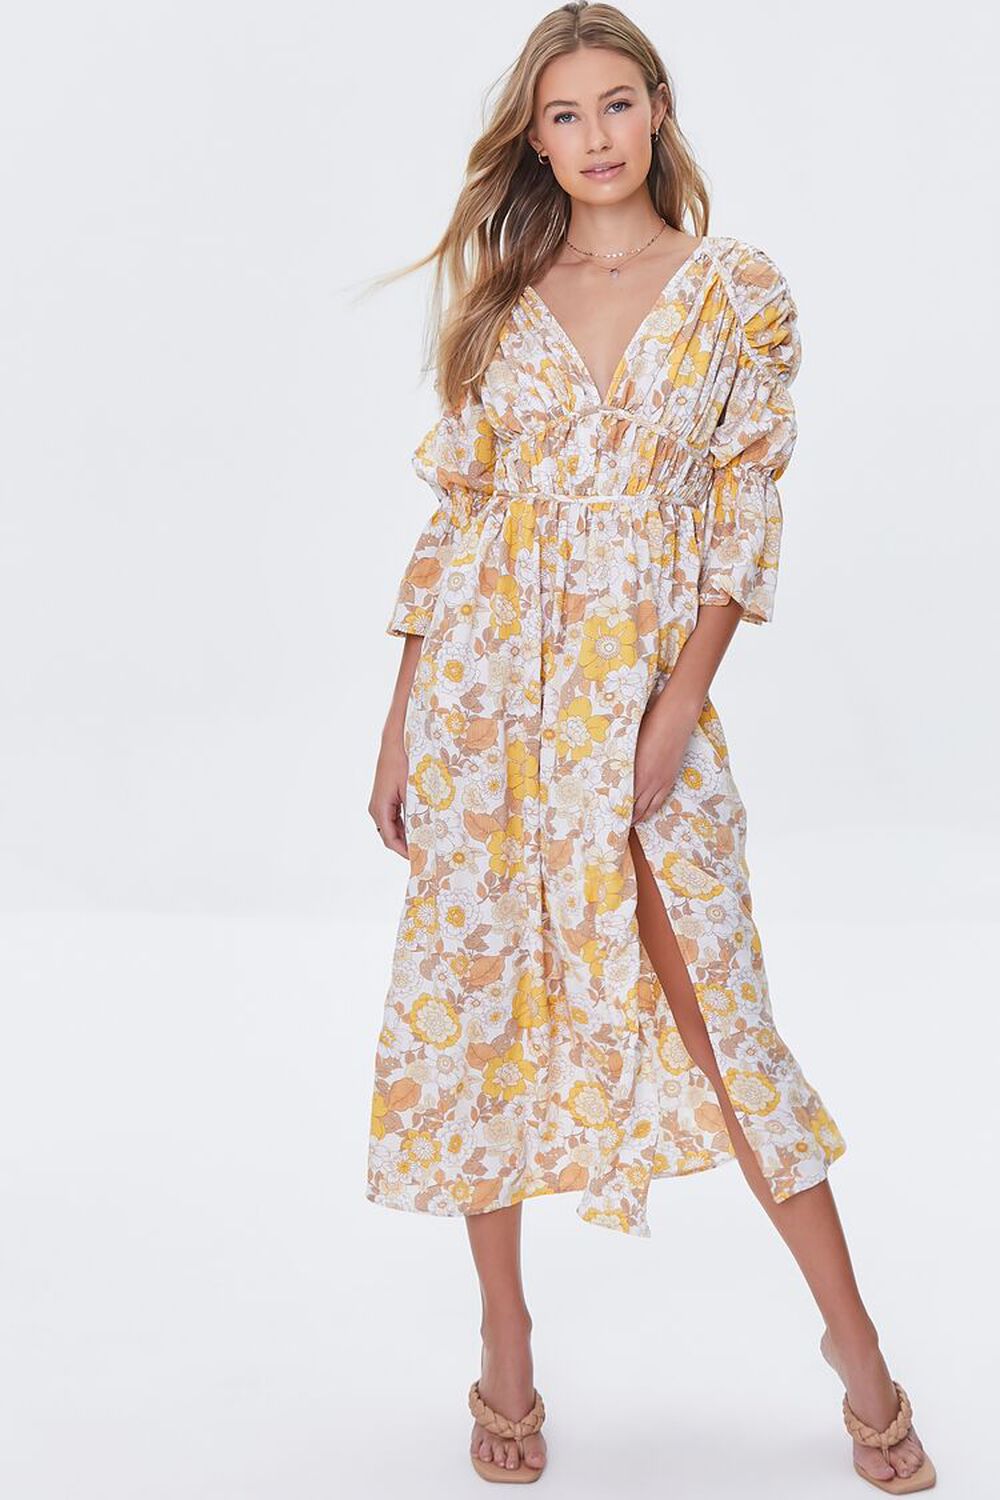 WHITE/MULTI Floral Print Bell Sleeve Dress, image 1